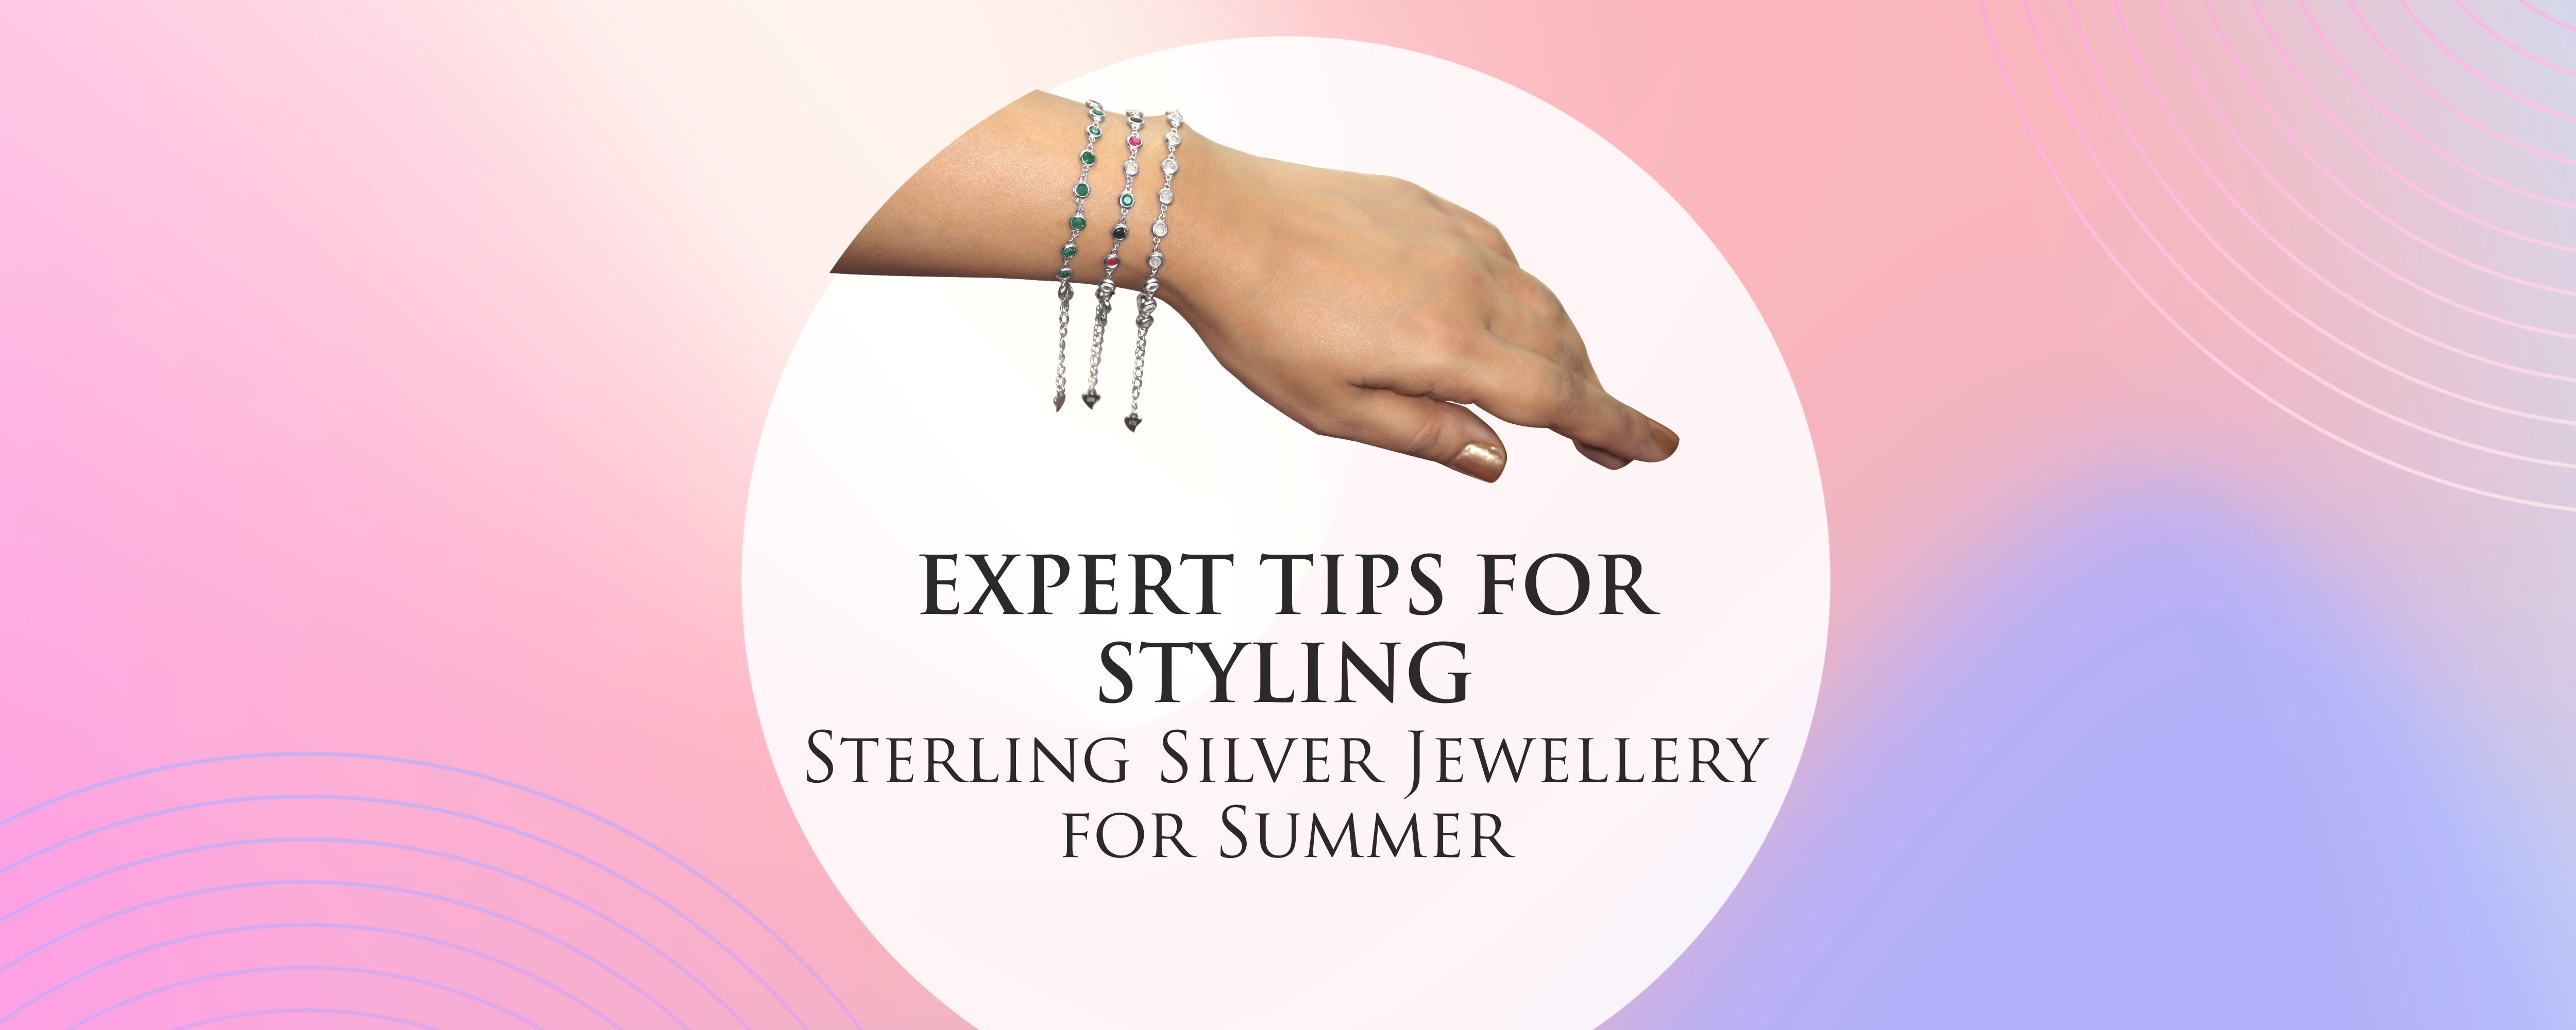 Expert Tips for Styling Sterling Silver Jewellery for Summer